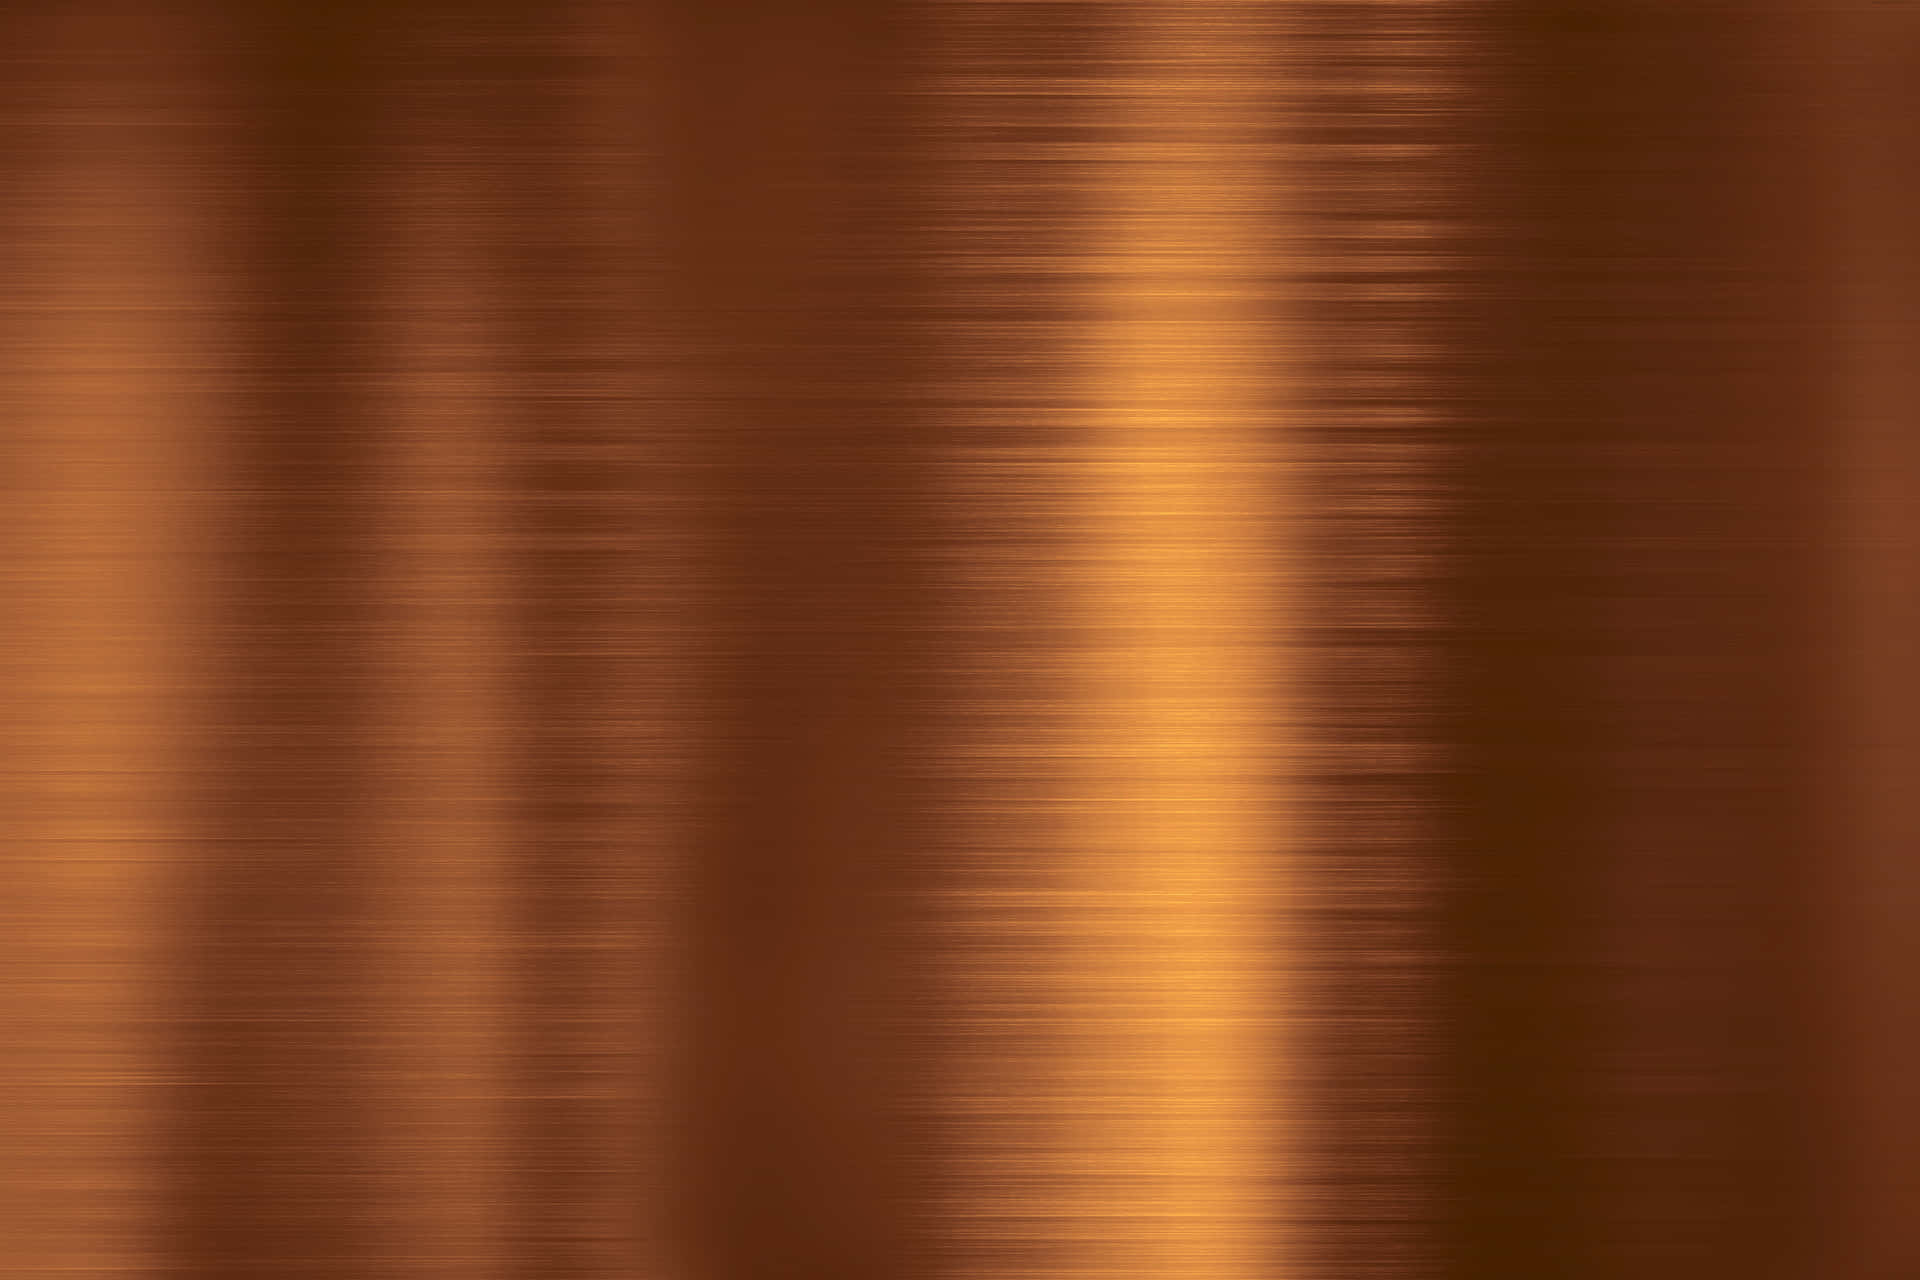 A Copper Metal Background With A Shiny Texture